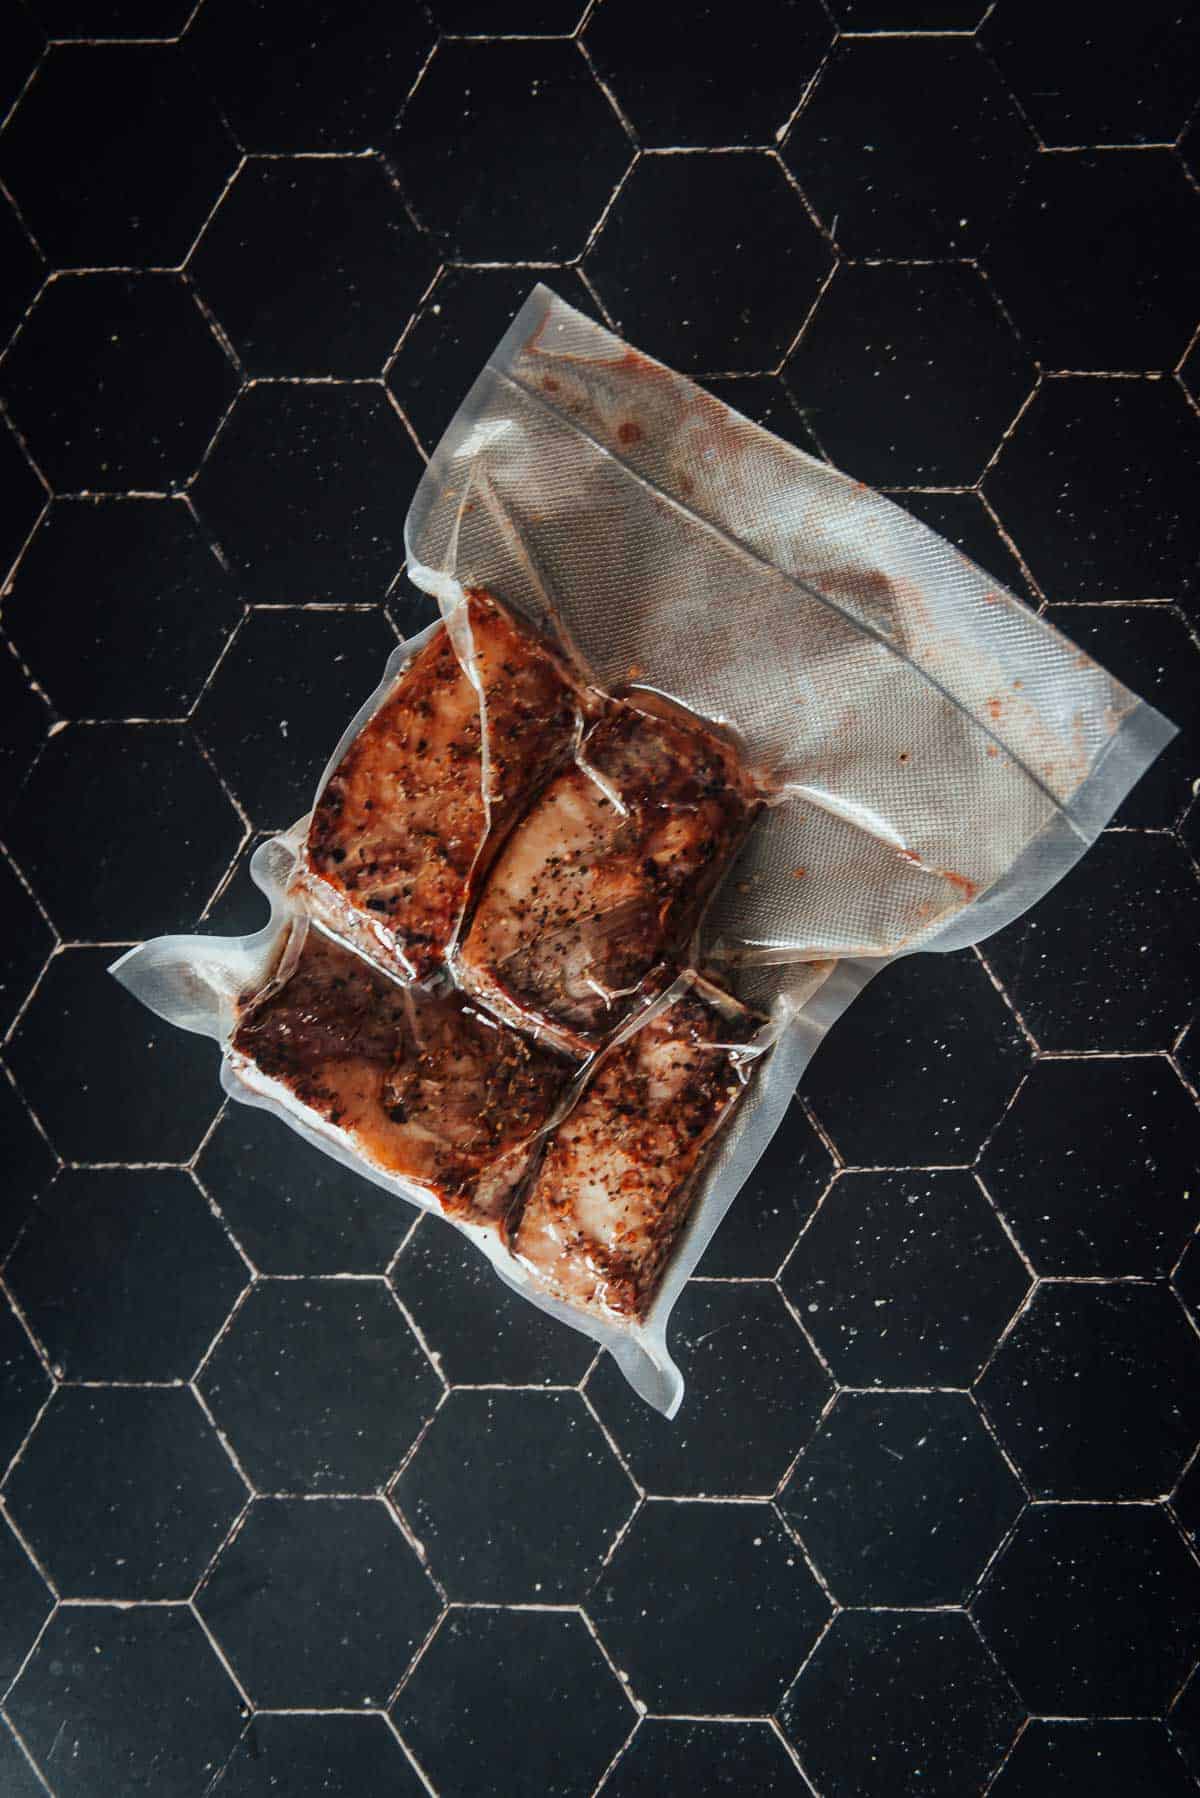 A short ribs in a plastic bag on a black surface.